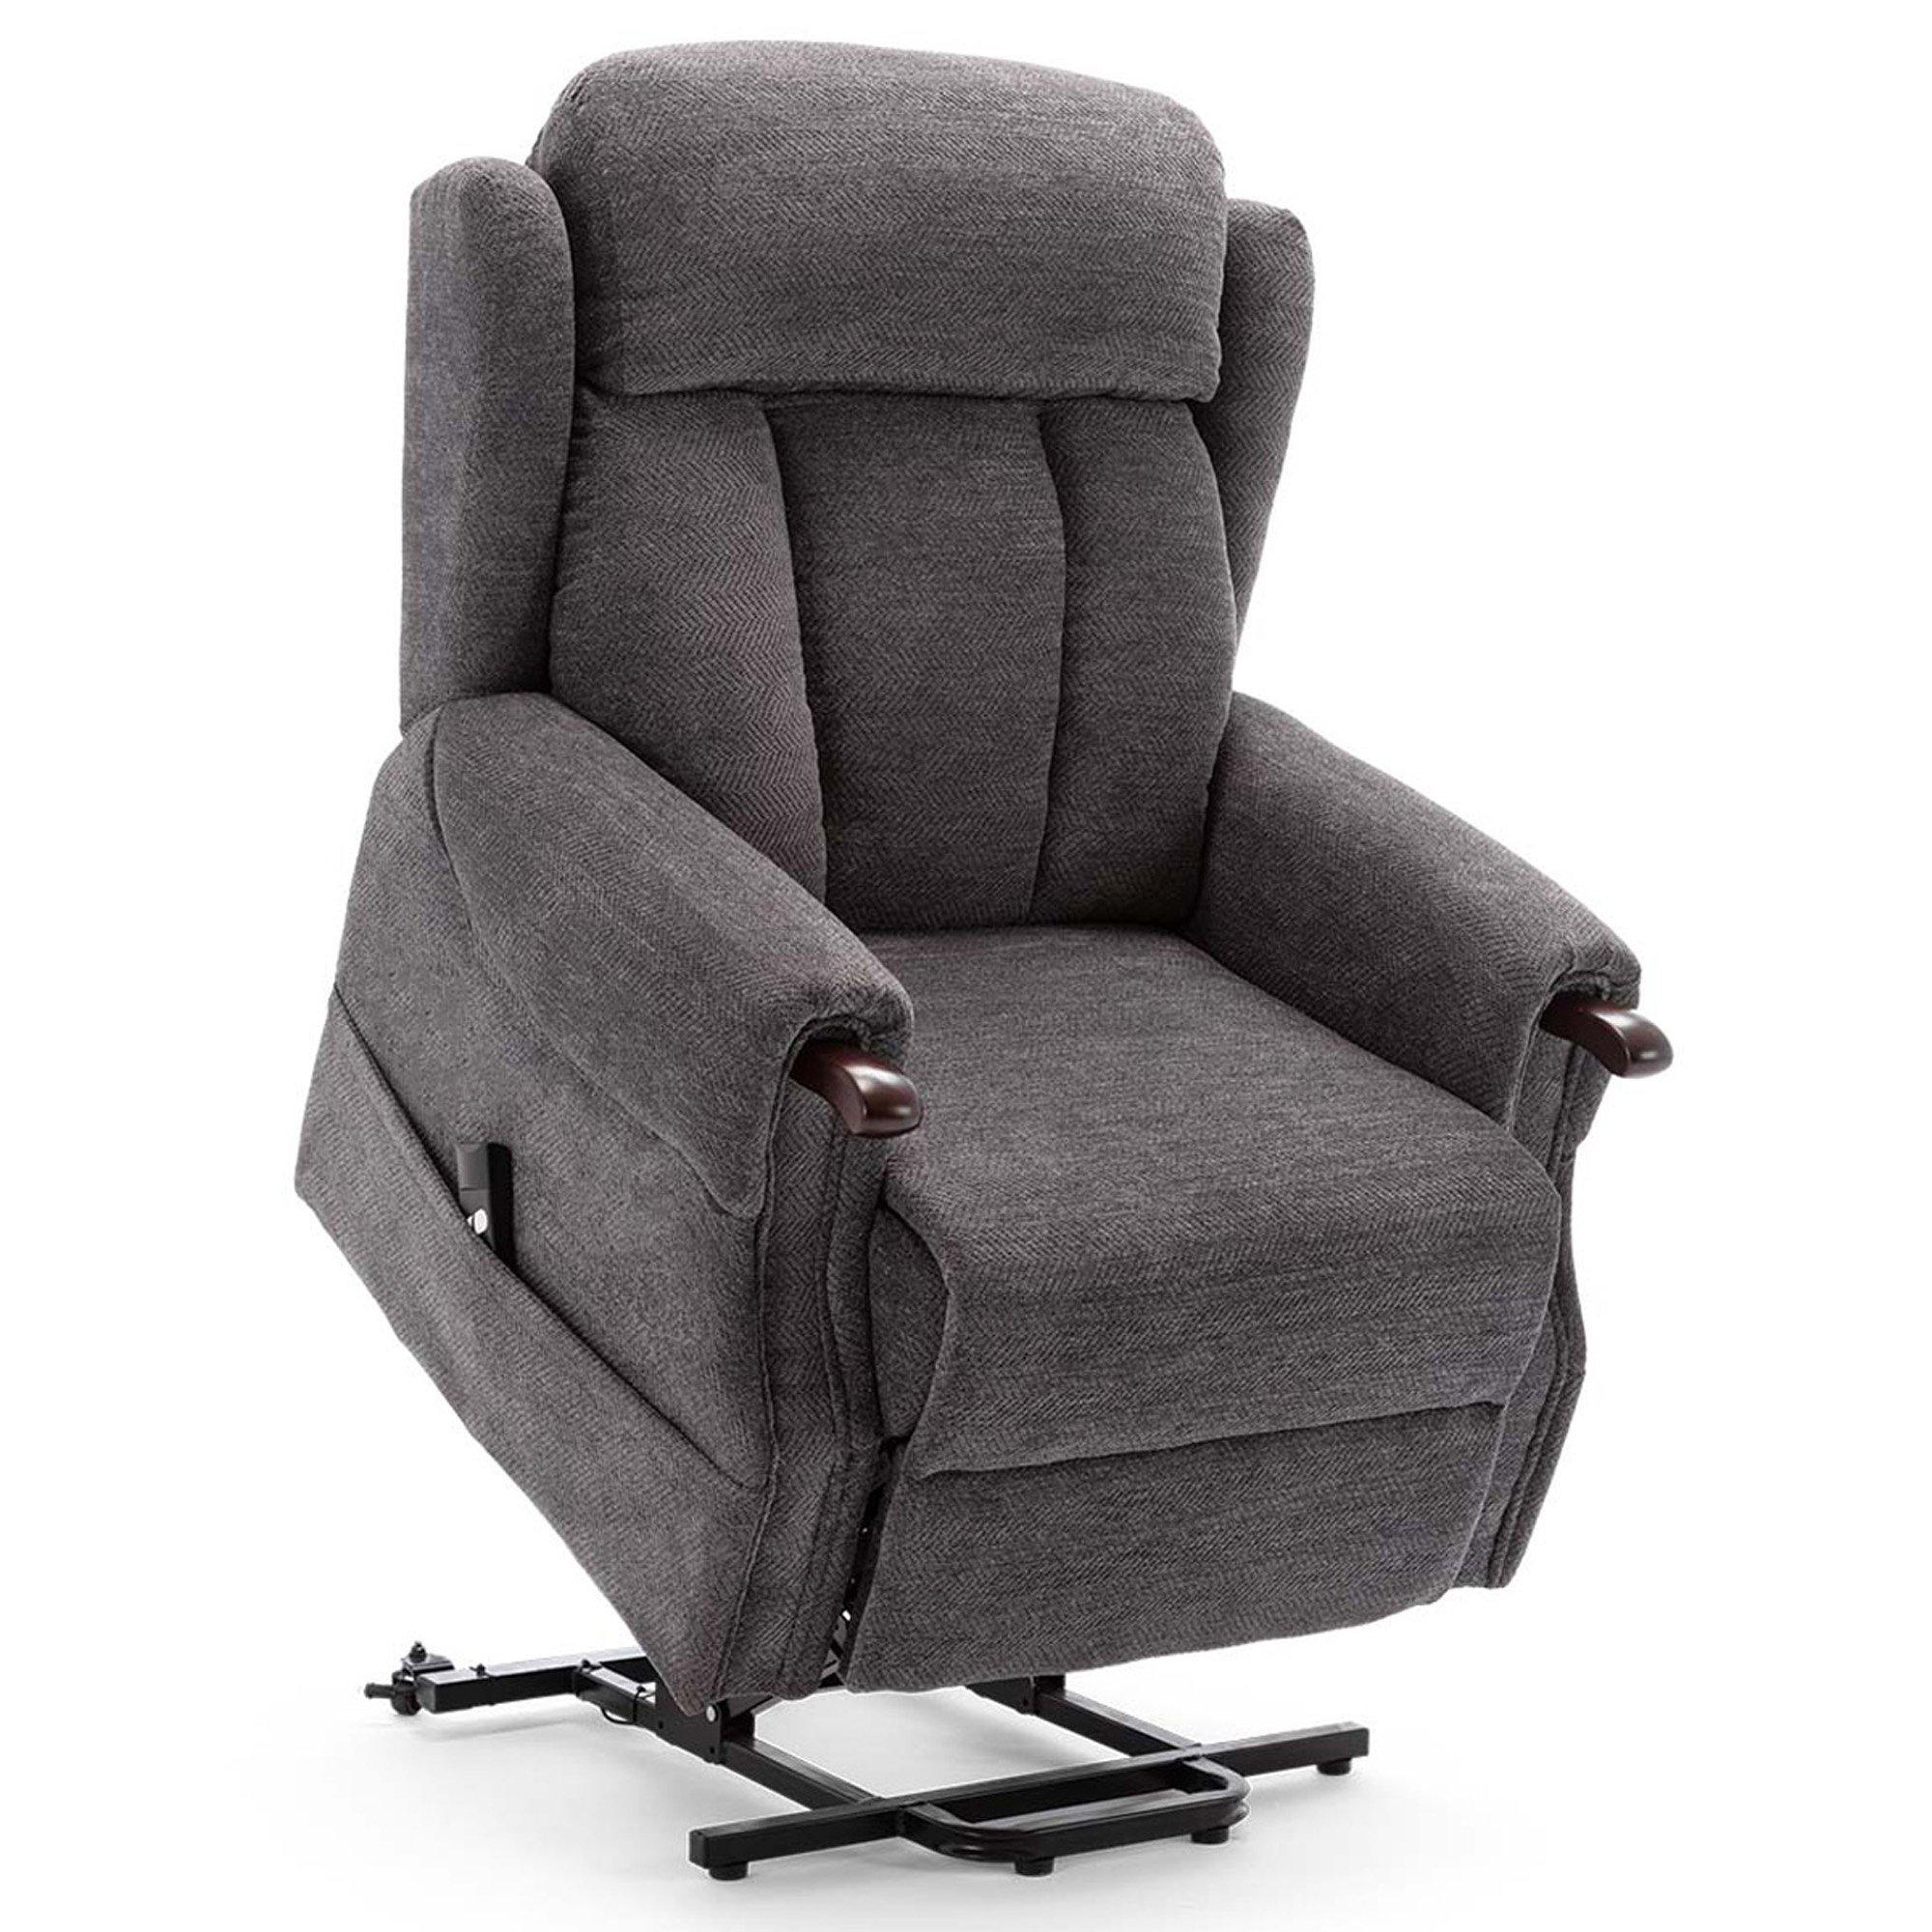 Halton Electric Fabric Single Motor Rise Recliner Lift Mobility Chair